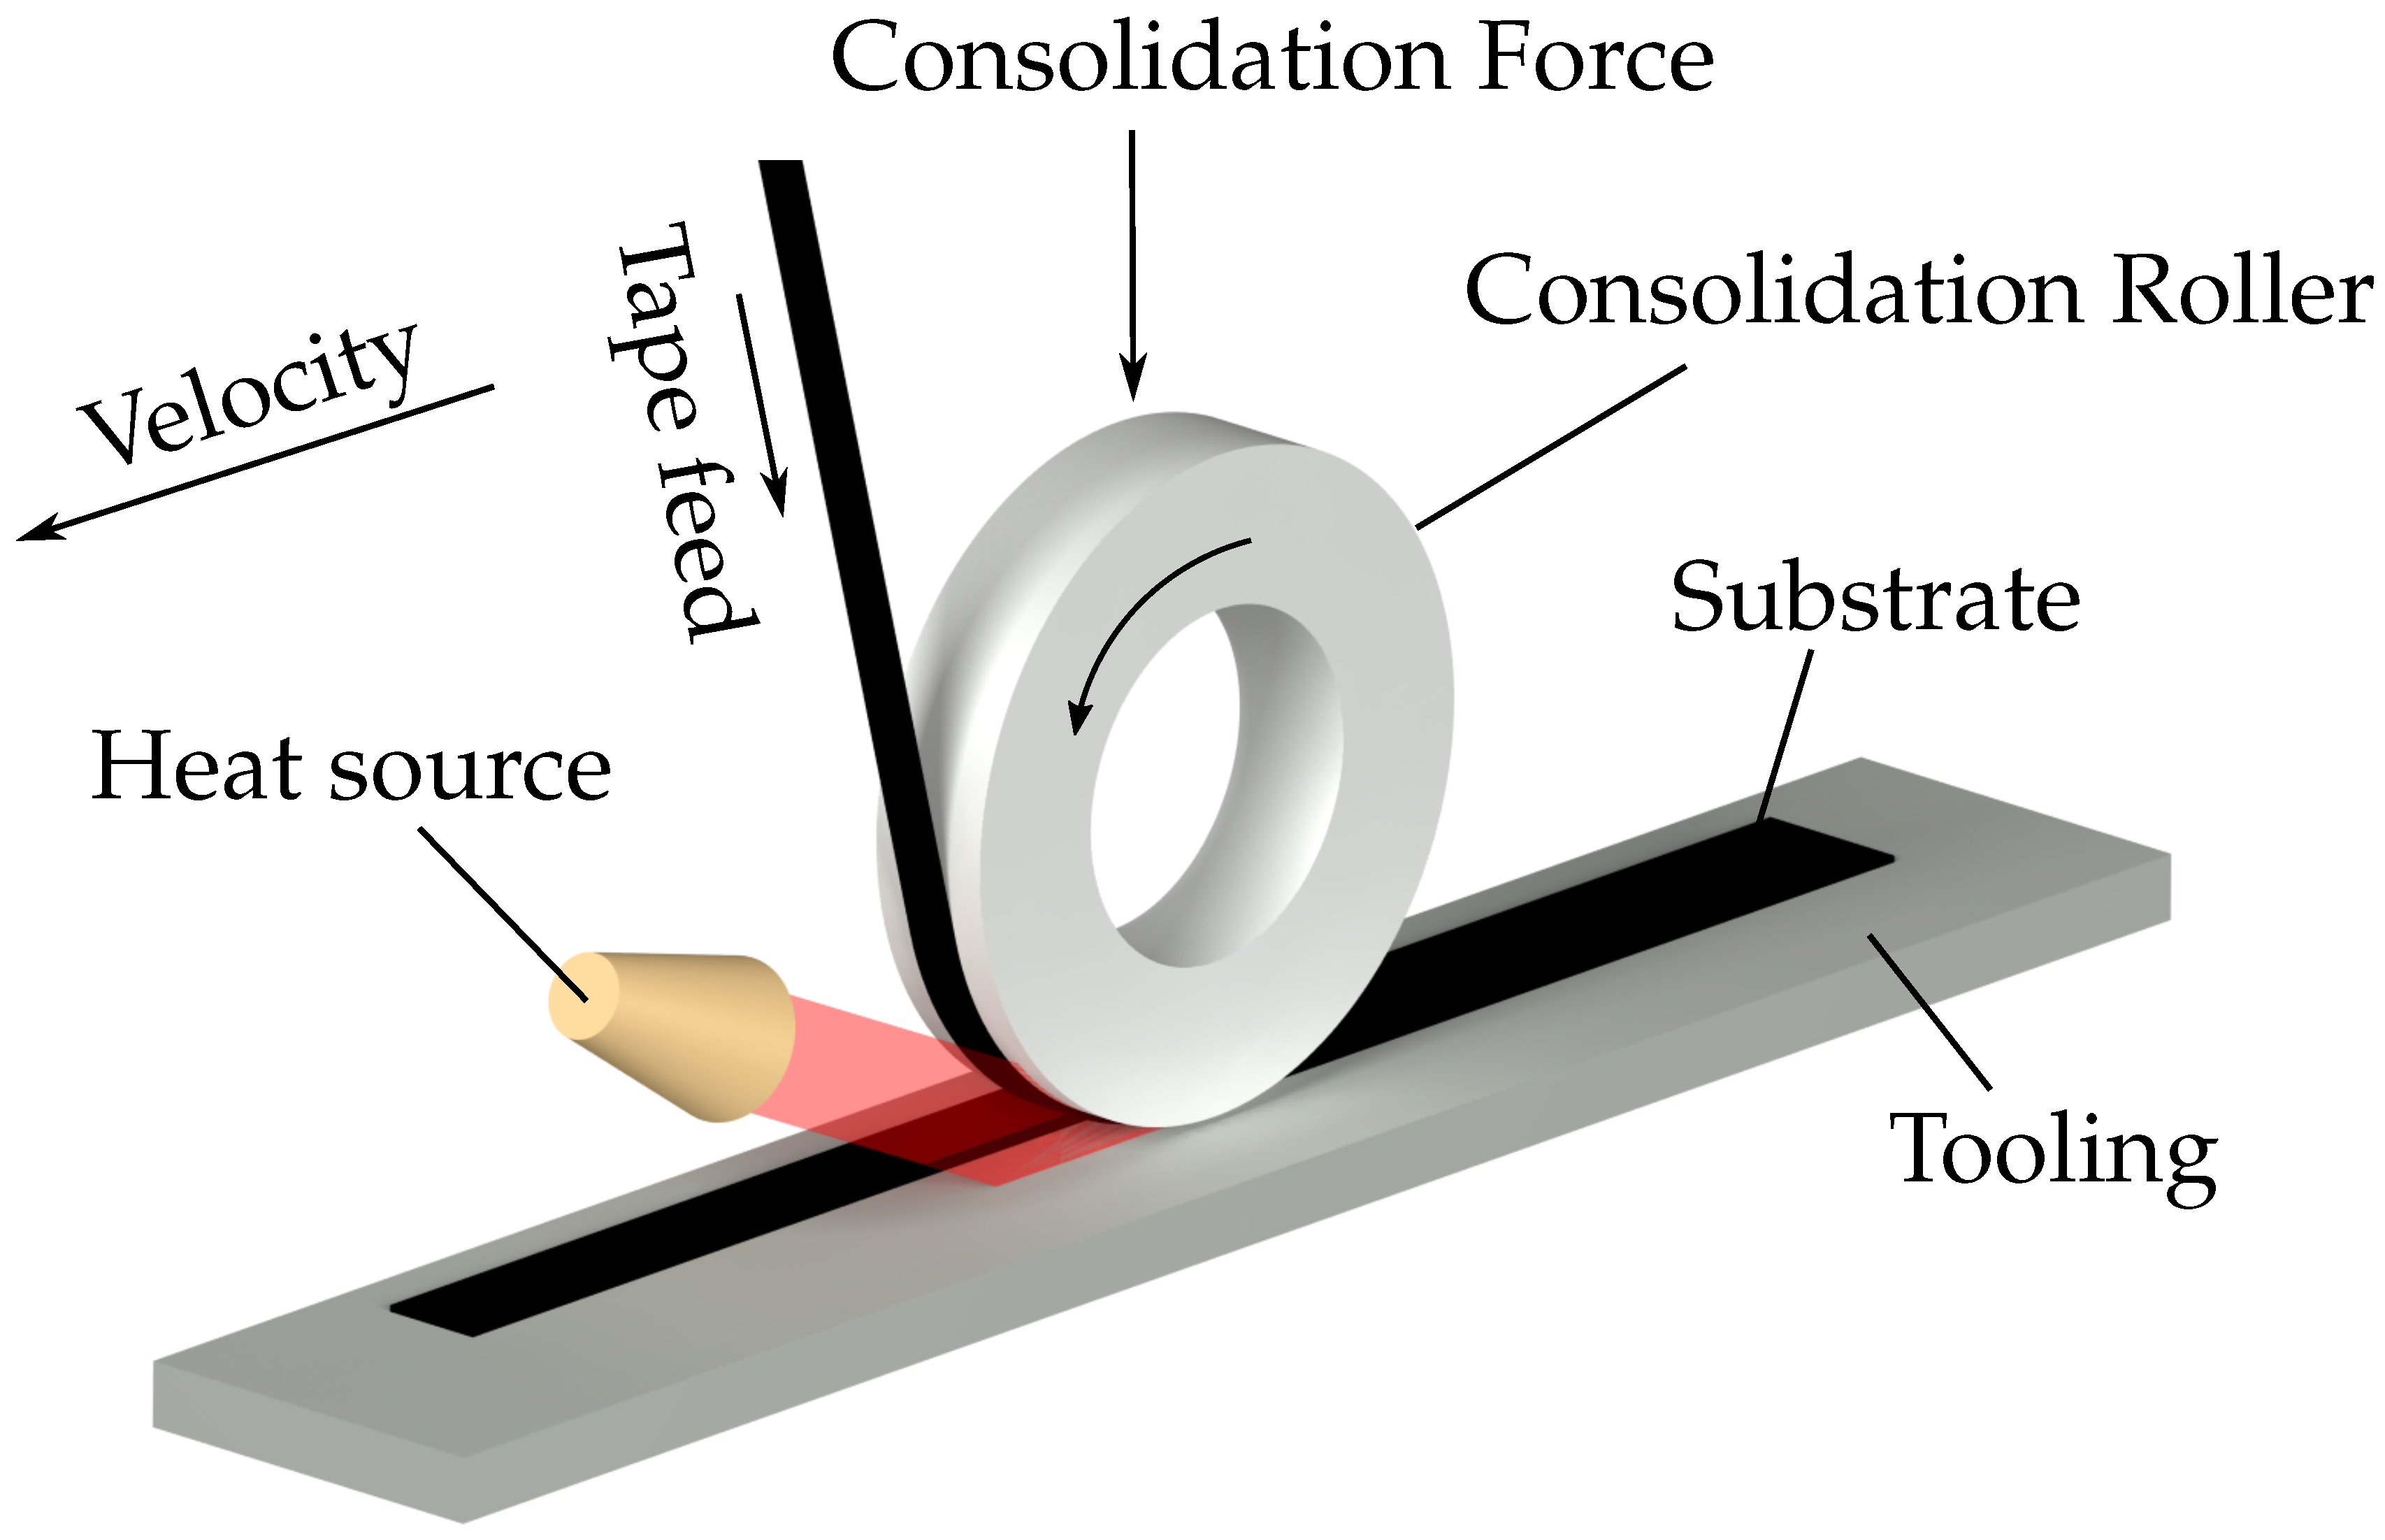 J. Compos. Sci. | Free Full-Text | In Situ Consolidation of Thermoplastic  Prepreg by Generating Harmonic Oscillations on the Consolidation Roller